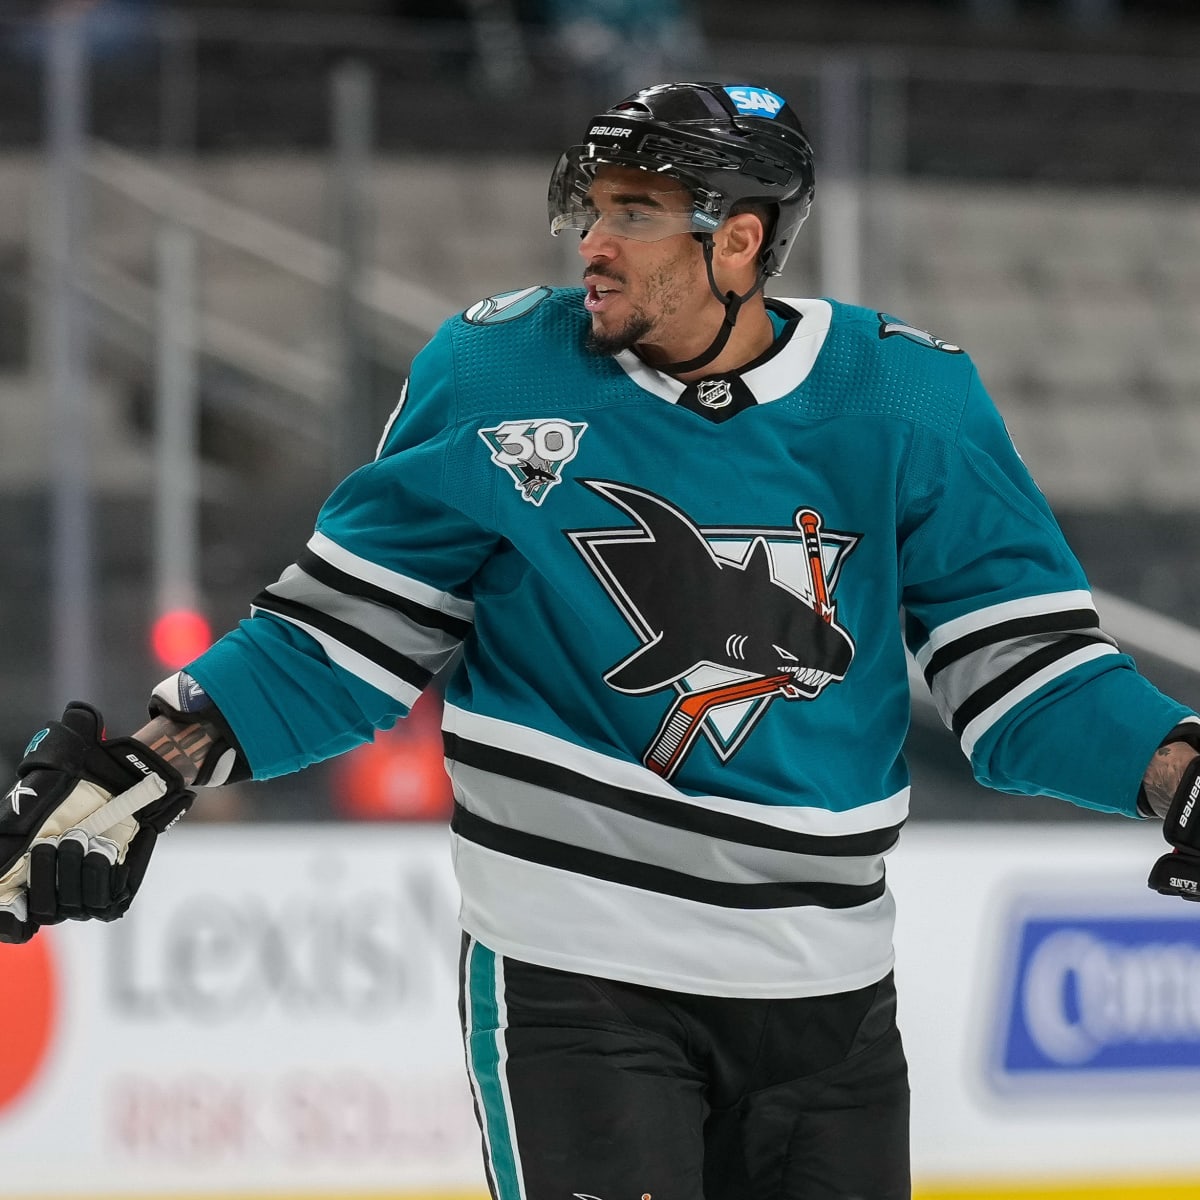 NHL: Evander Kane expected to find new home in league